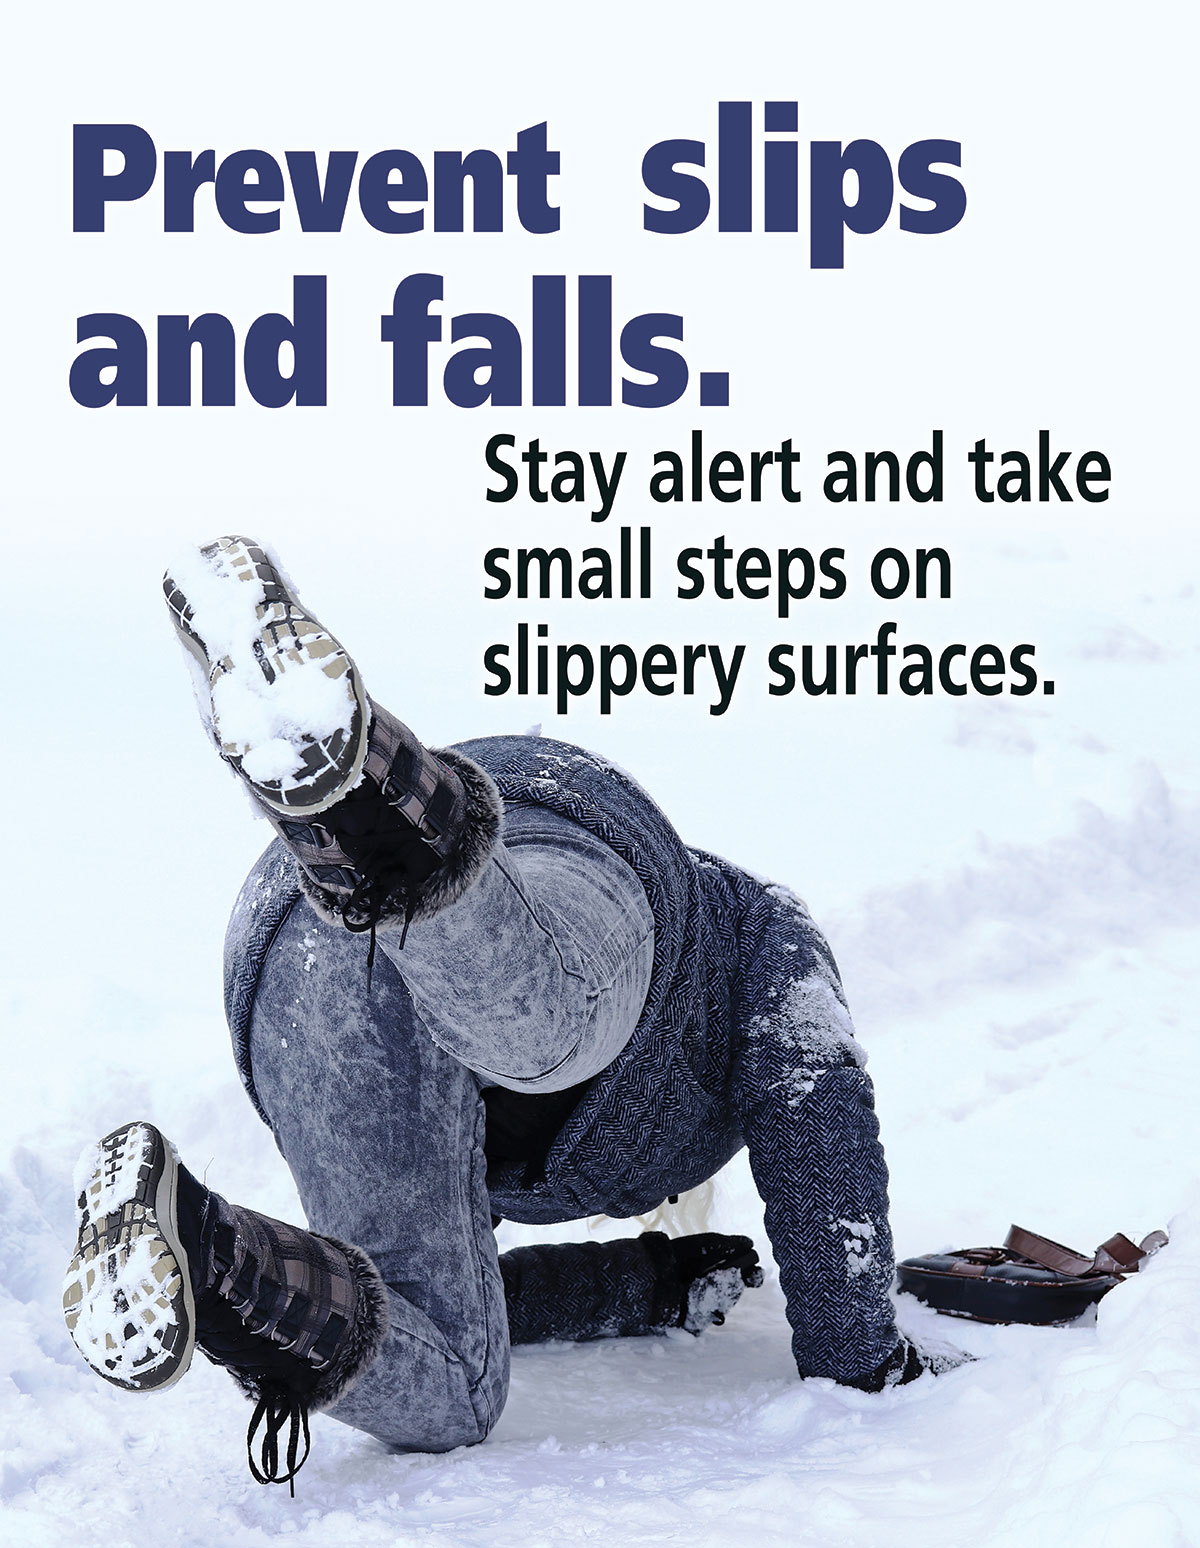 Winter Hazards, Slips and Falls, Cold